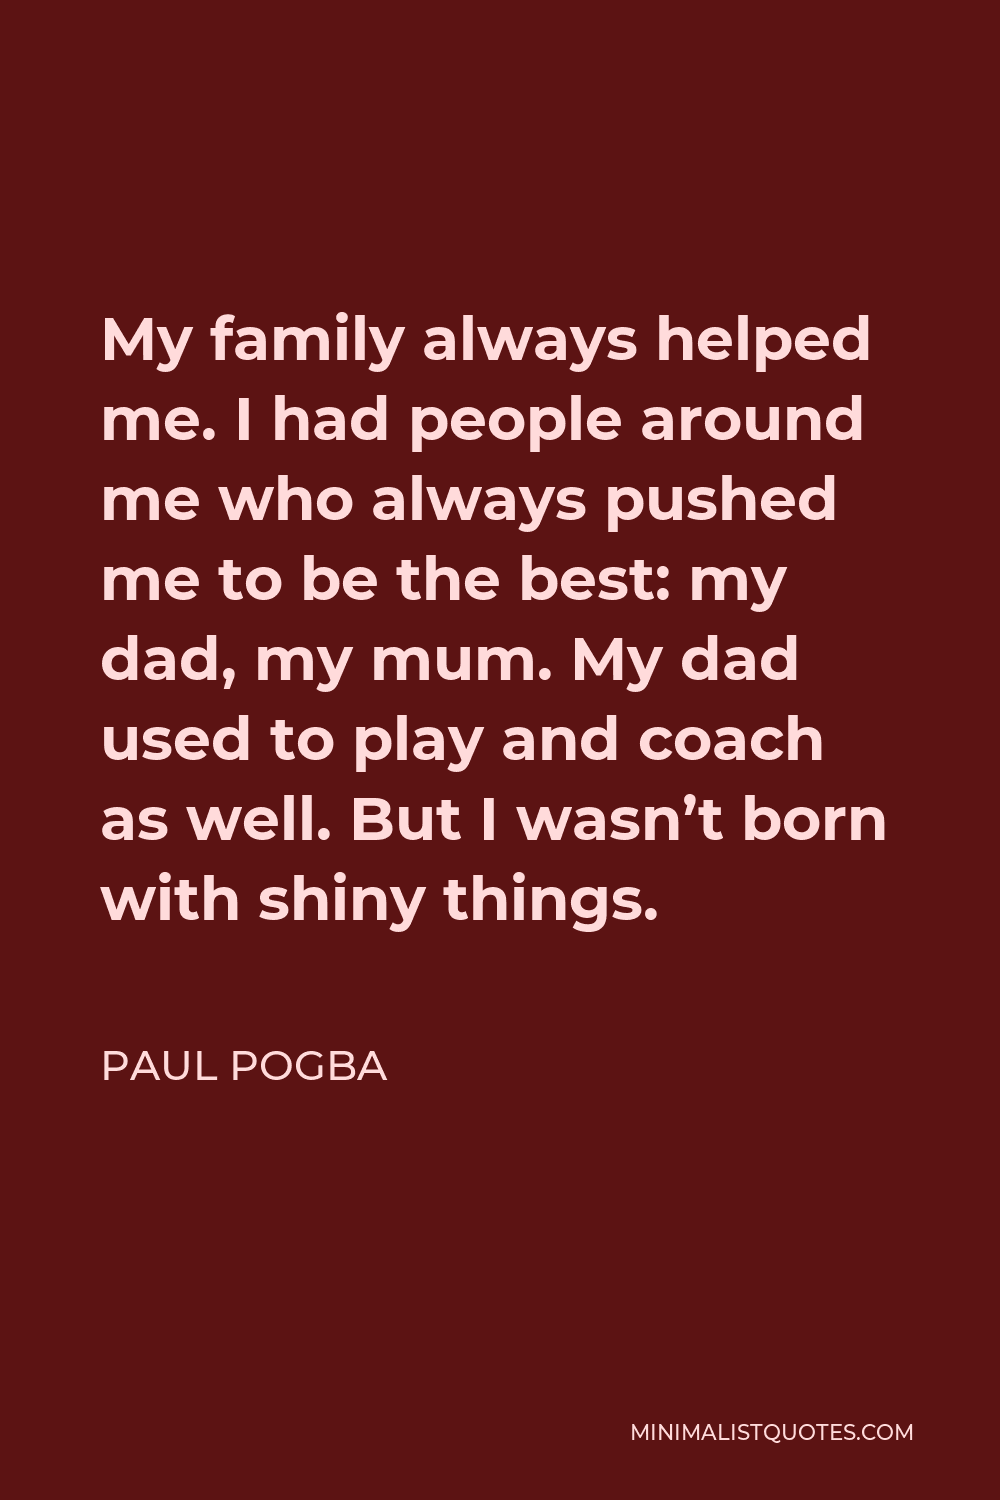 Paul Pogba Quote - My family always helped me. I had people around me who always pushed me to be the best: my dad, my mum. My dad used to play and coach as well. But I wasn’t born with shiny things.